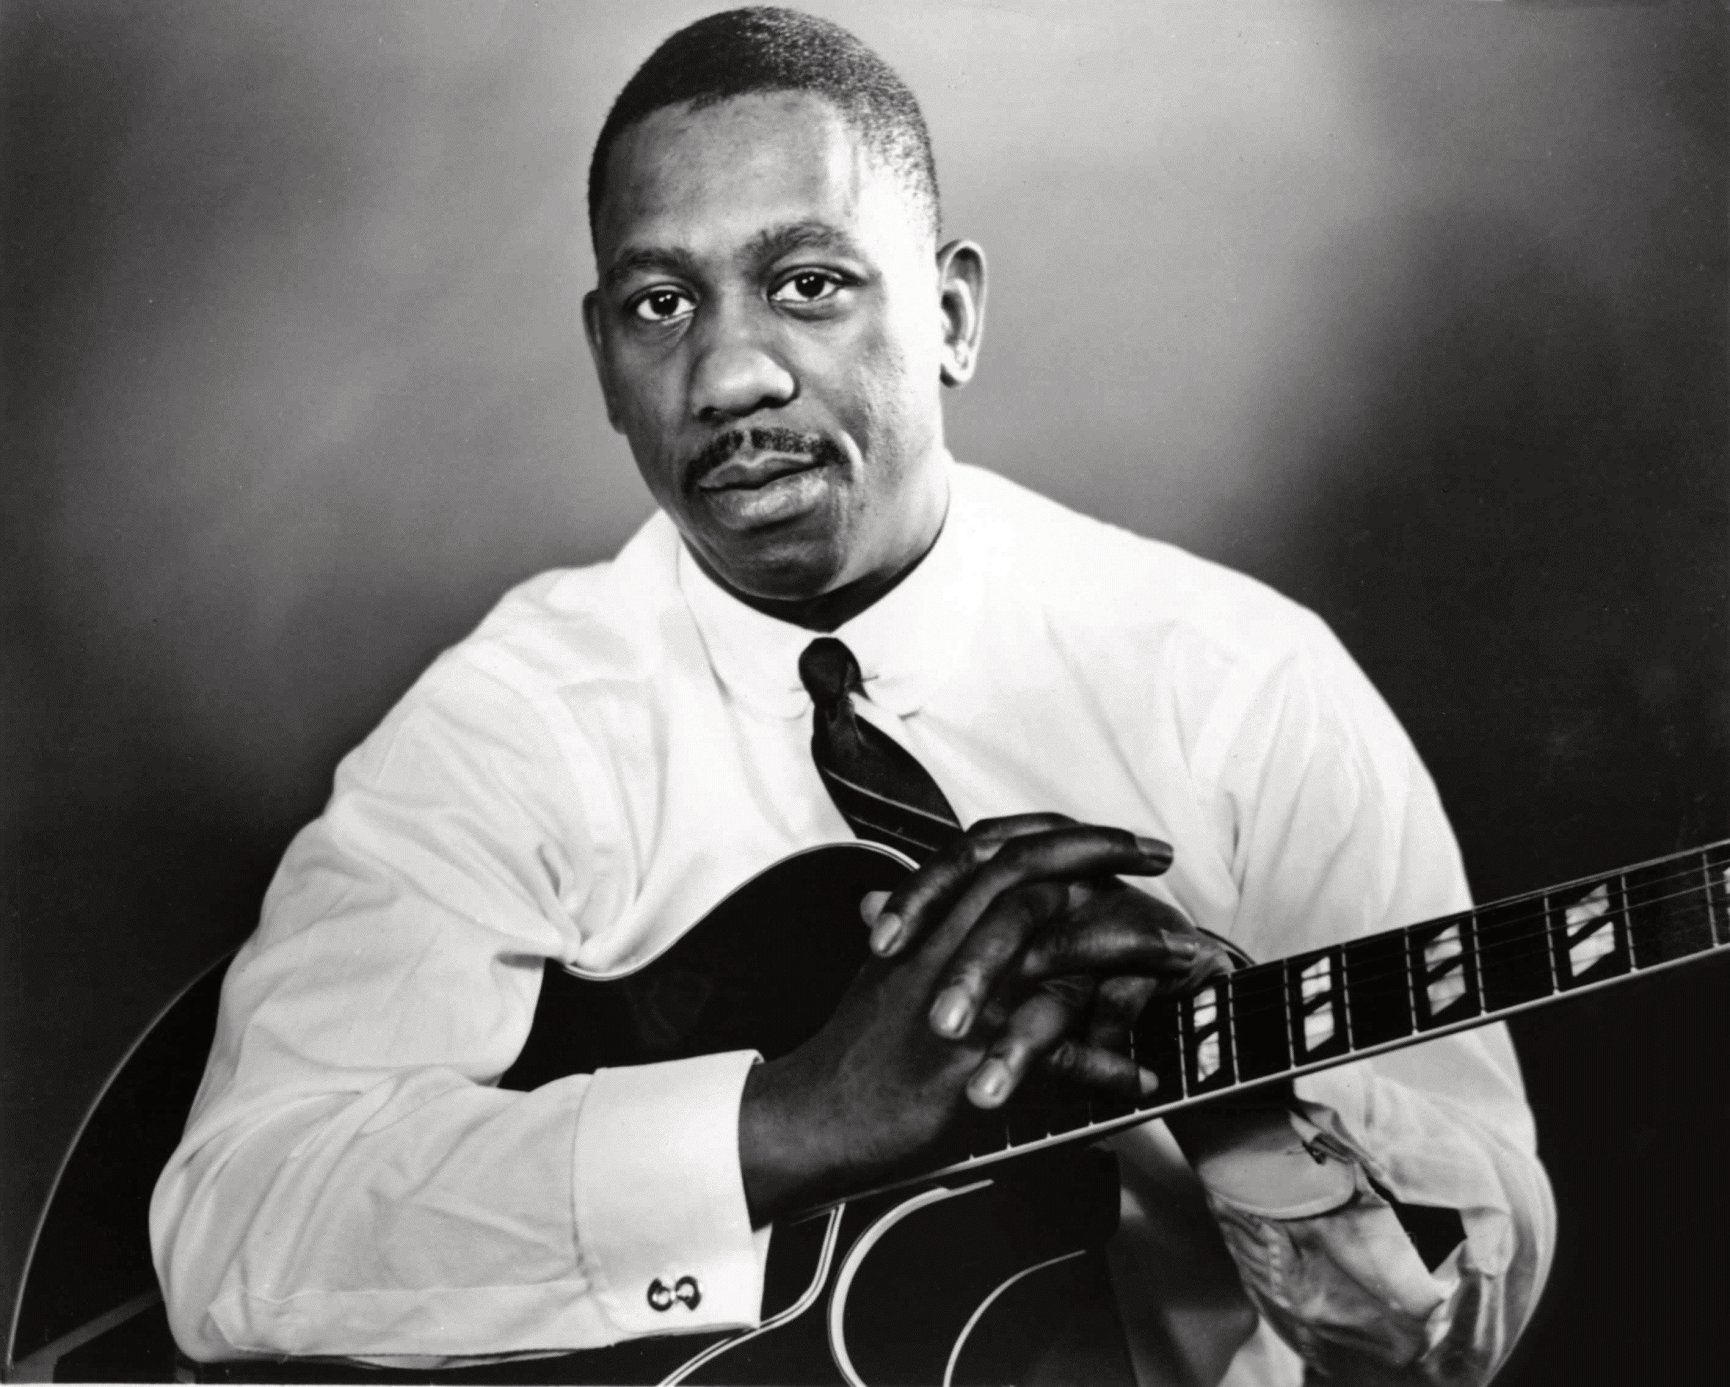 HAPPY BIRTHDAY MARCH 6TH TO LEGENDARY JAZZ GUITARIST, THE LATE GREAT WES MONTGOMERY.